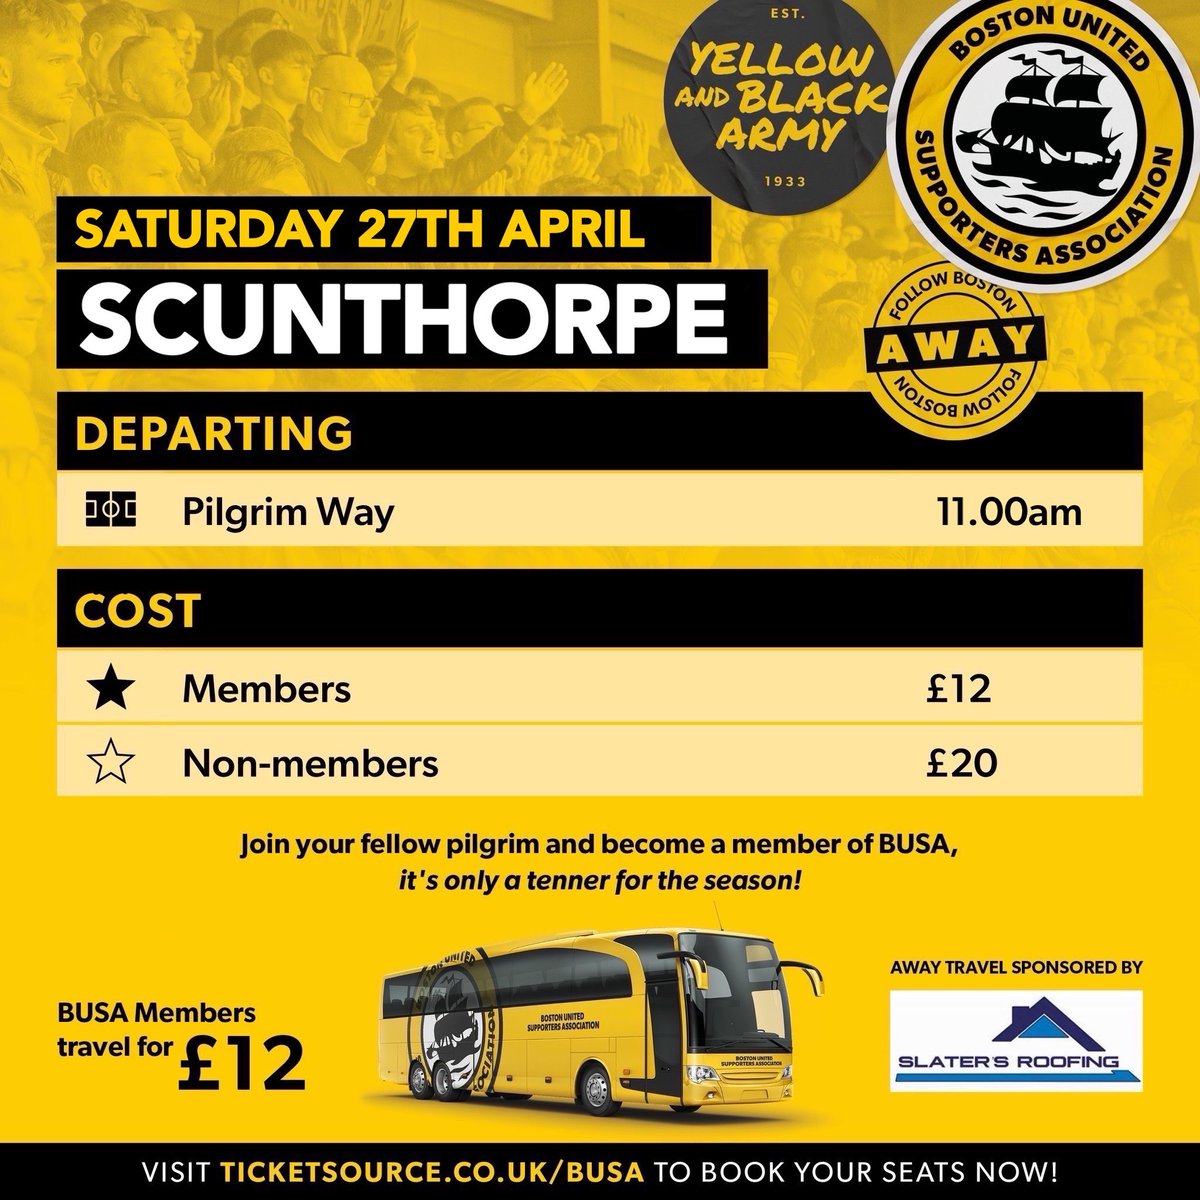 Semi-finals, here we come!

The Supporters Association coach for Scunthorpe is now live on TicketSource, please book early so we can get an idea of numbers. More updates to follow.

🧡 Members £12
🖤 Non-members £20